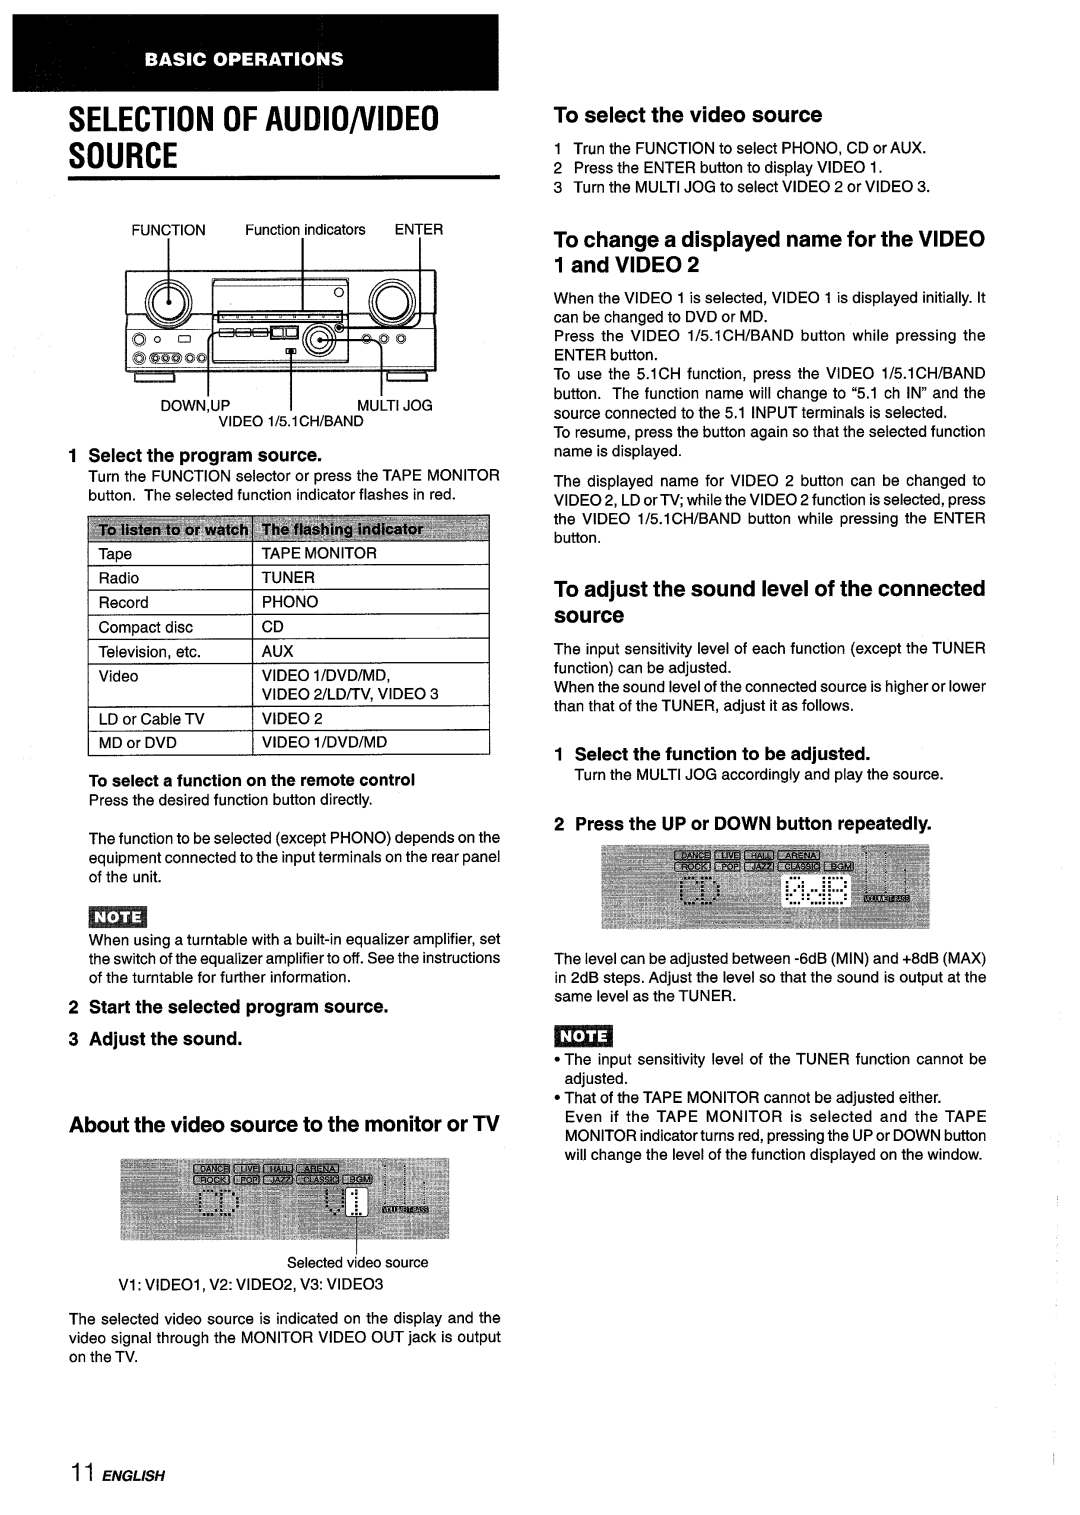 Aiwa AV-D55 manual Selection Of Audio/Video Source, About the video source to the monitor or TV, To select the video source 